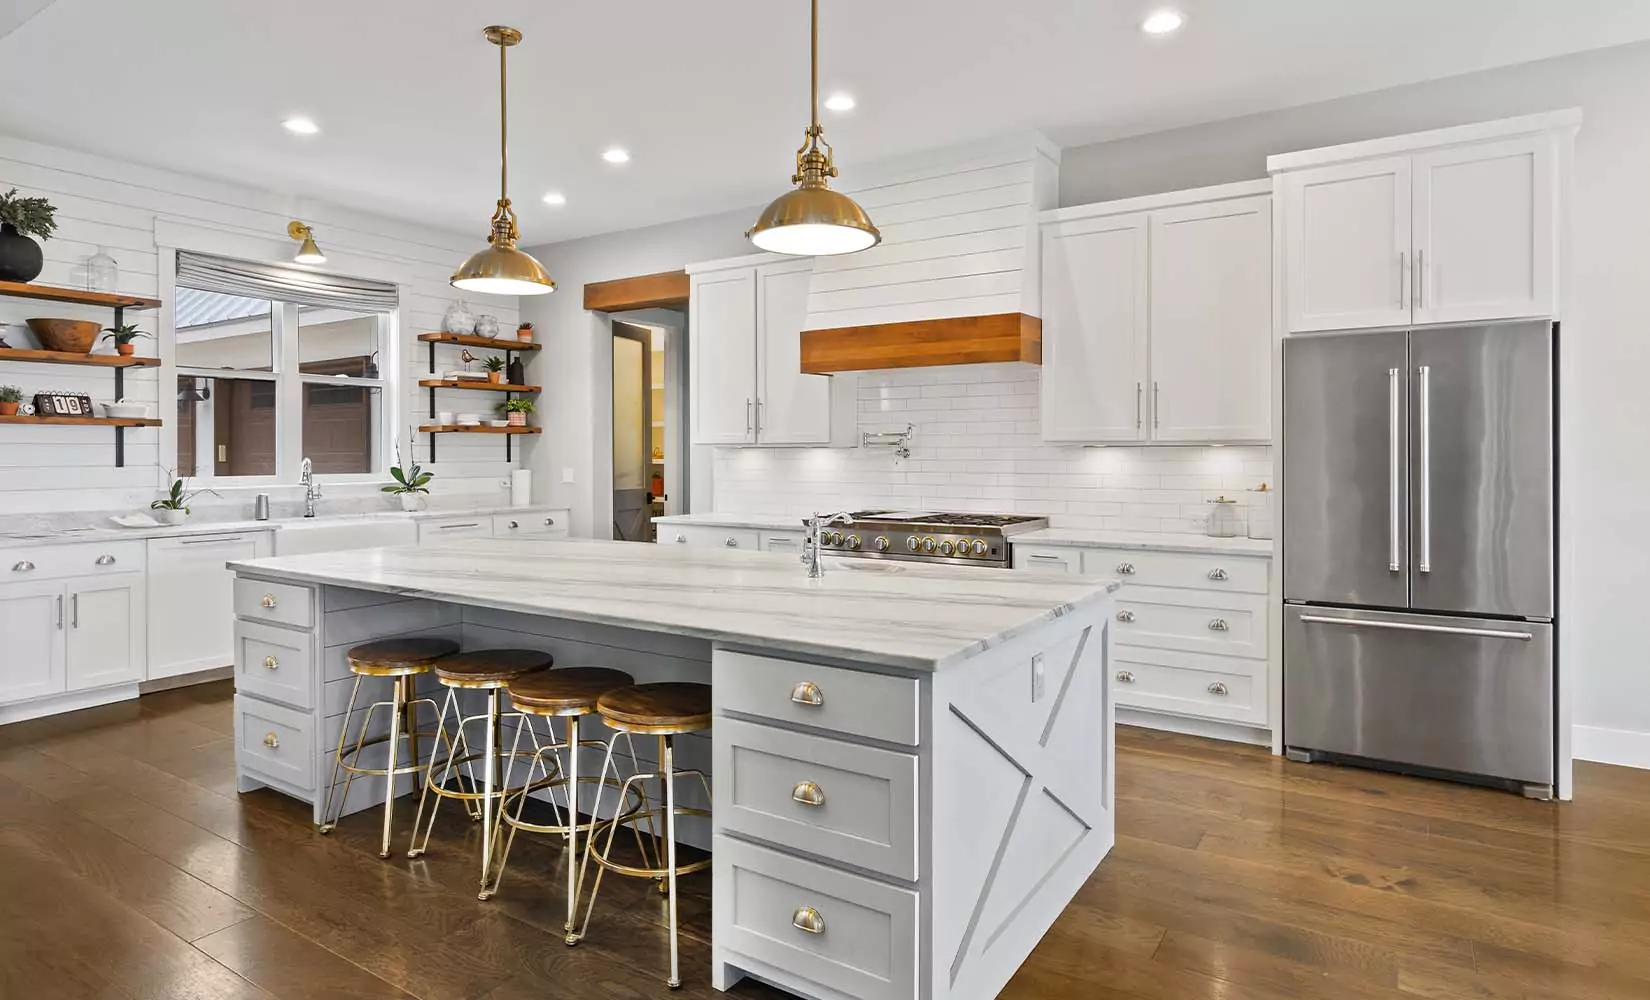 Gray farmhouse kitchen with antique bronze hardware and light fixtures.